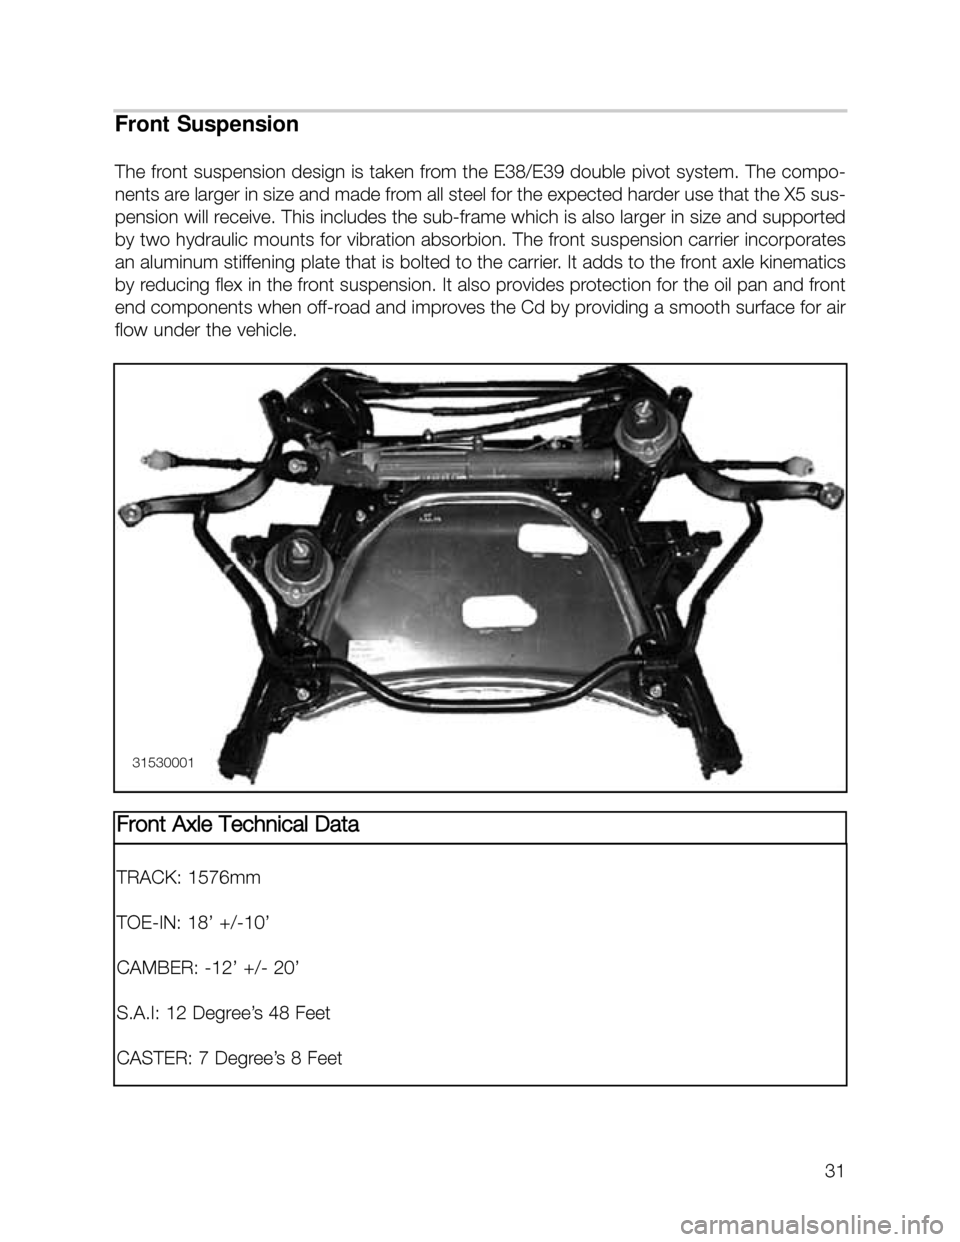 BMW X5 2006 E53 Owners Guide 31
Front Suspension
The front suspension design is taken from the E38/E39 double pivot system. The compo-
nents are larger in size and made from all steel for the expected harder use that the X5 sus-
